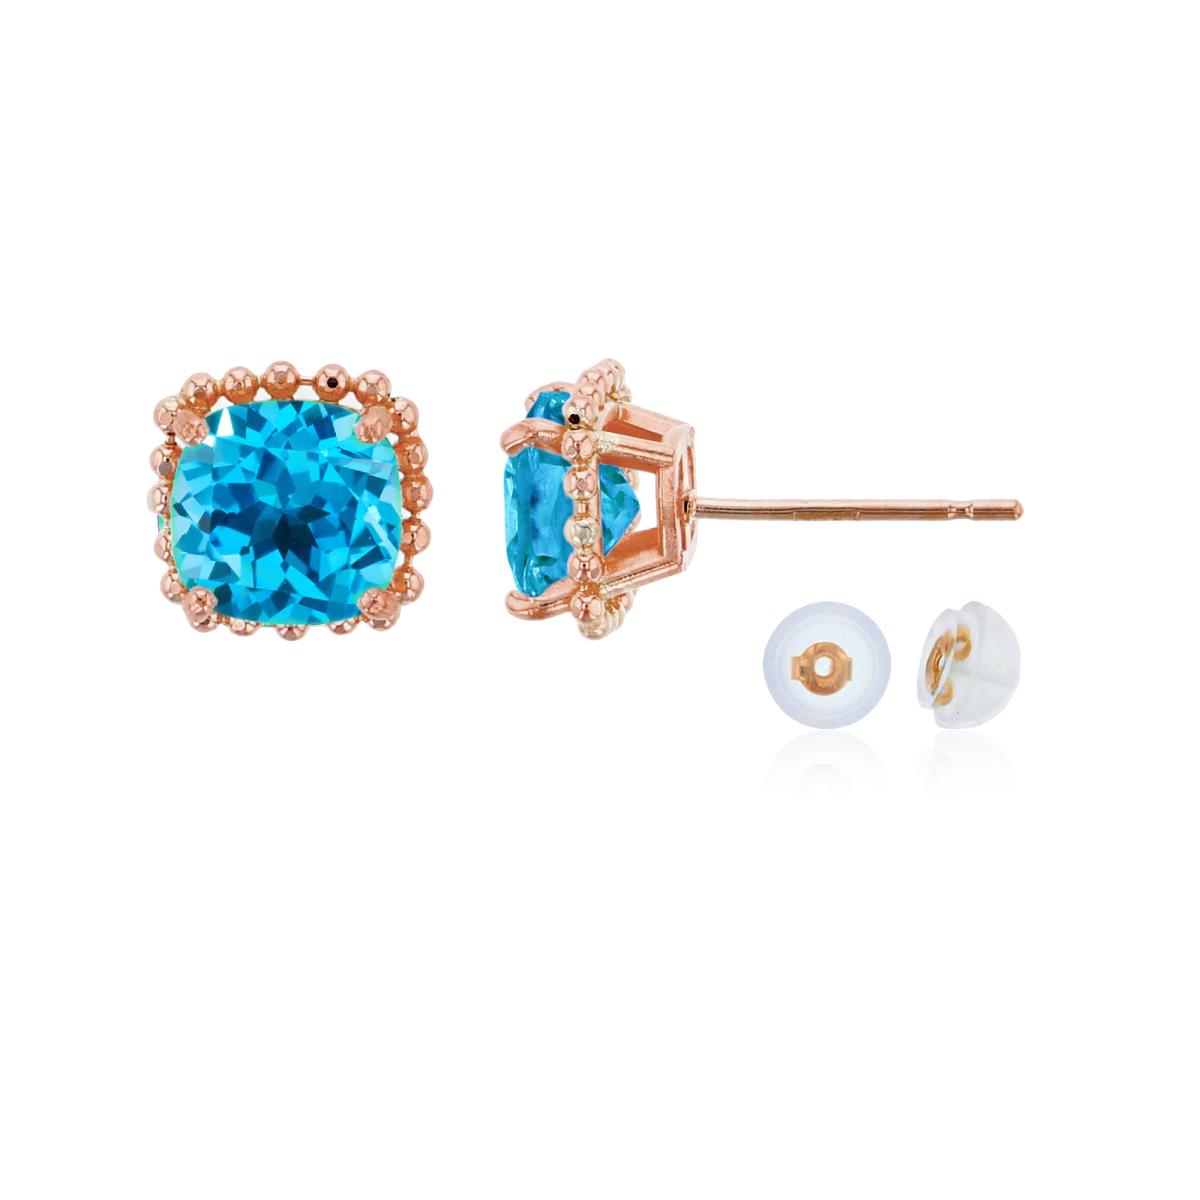 10K Rose Gold 6x6mm Cushion Cut Swiss Blue Topaz Bead Frame Stud Earring with Silicone Back